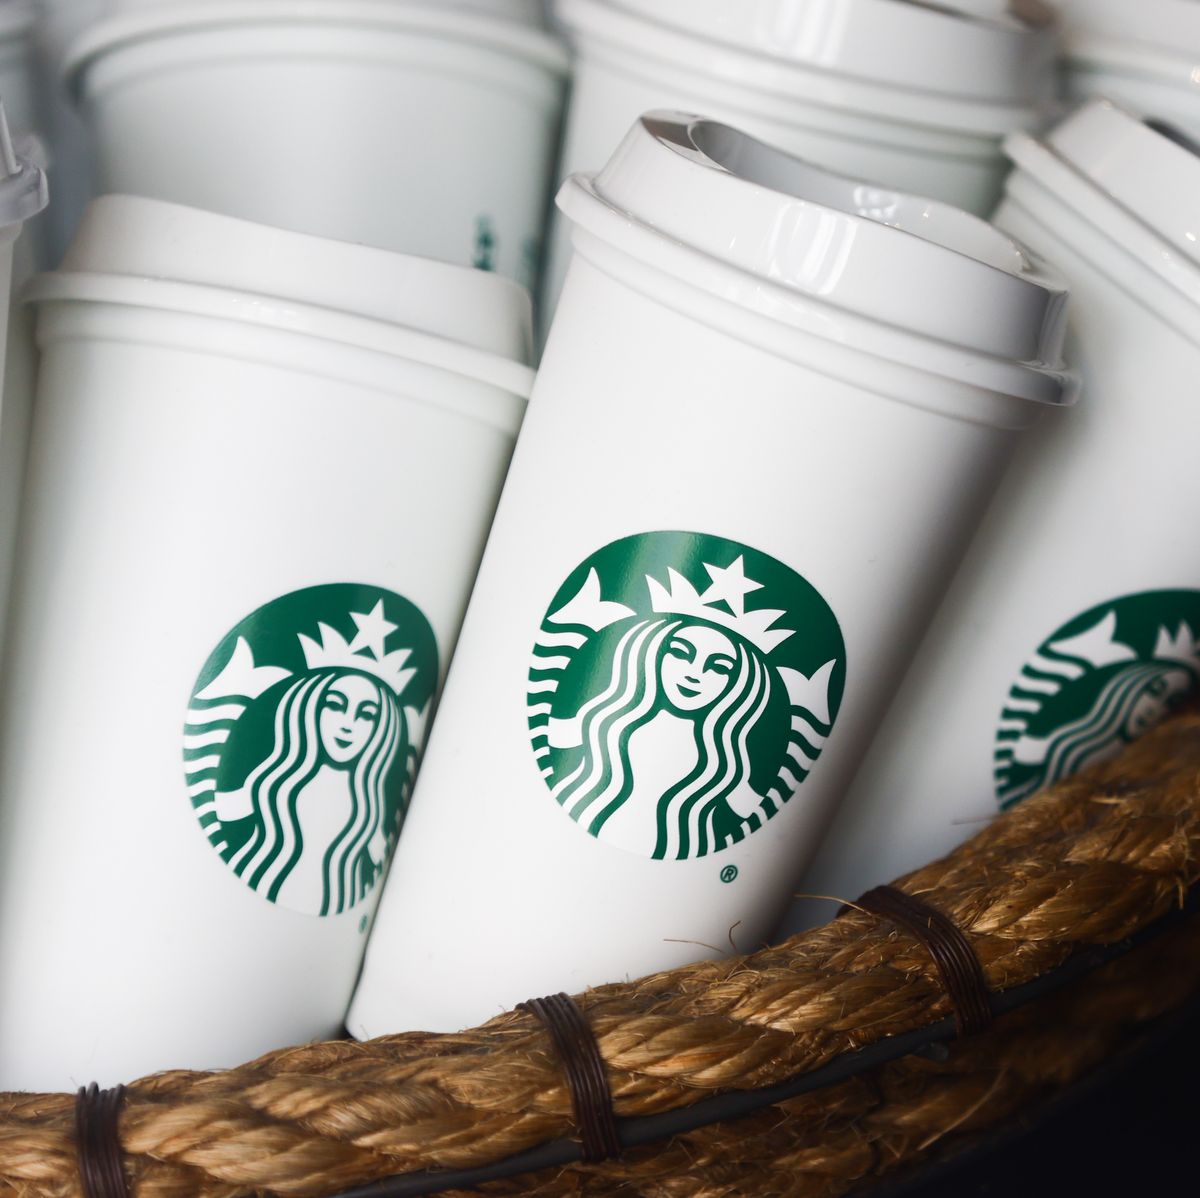 Starbucks wants to phase out iconic disposable cups with washing stations